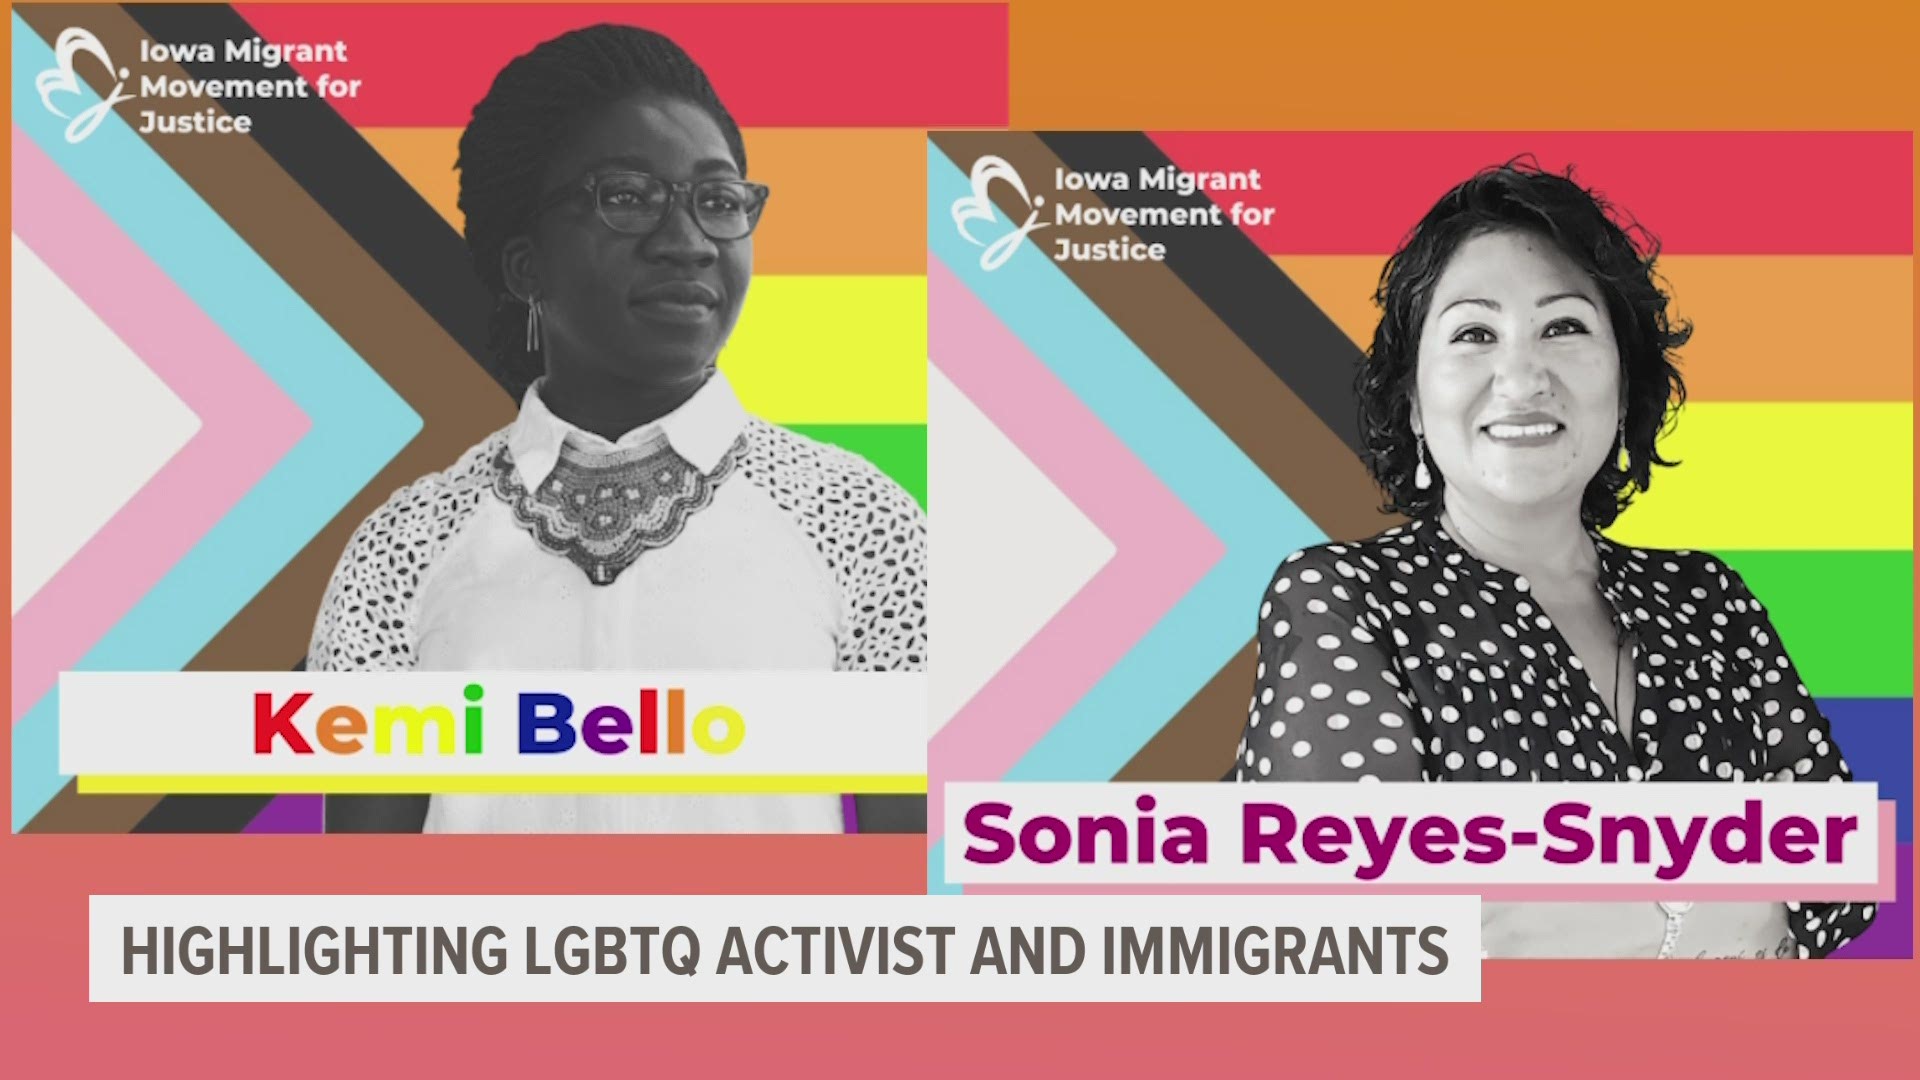 Iowa Migrant Movement for Justice is posting on their social media pages, about local and national LGBTQ immigrants who are activists, to educate the community.